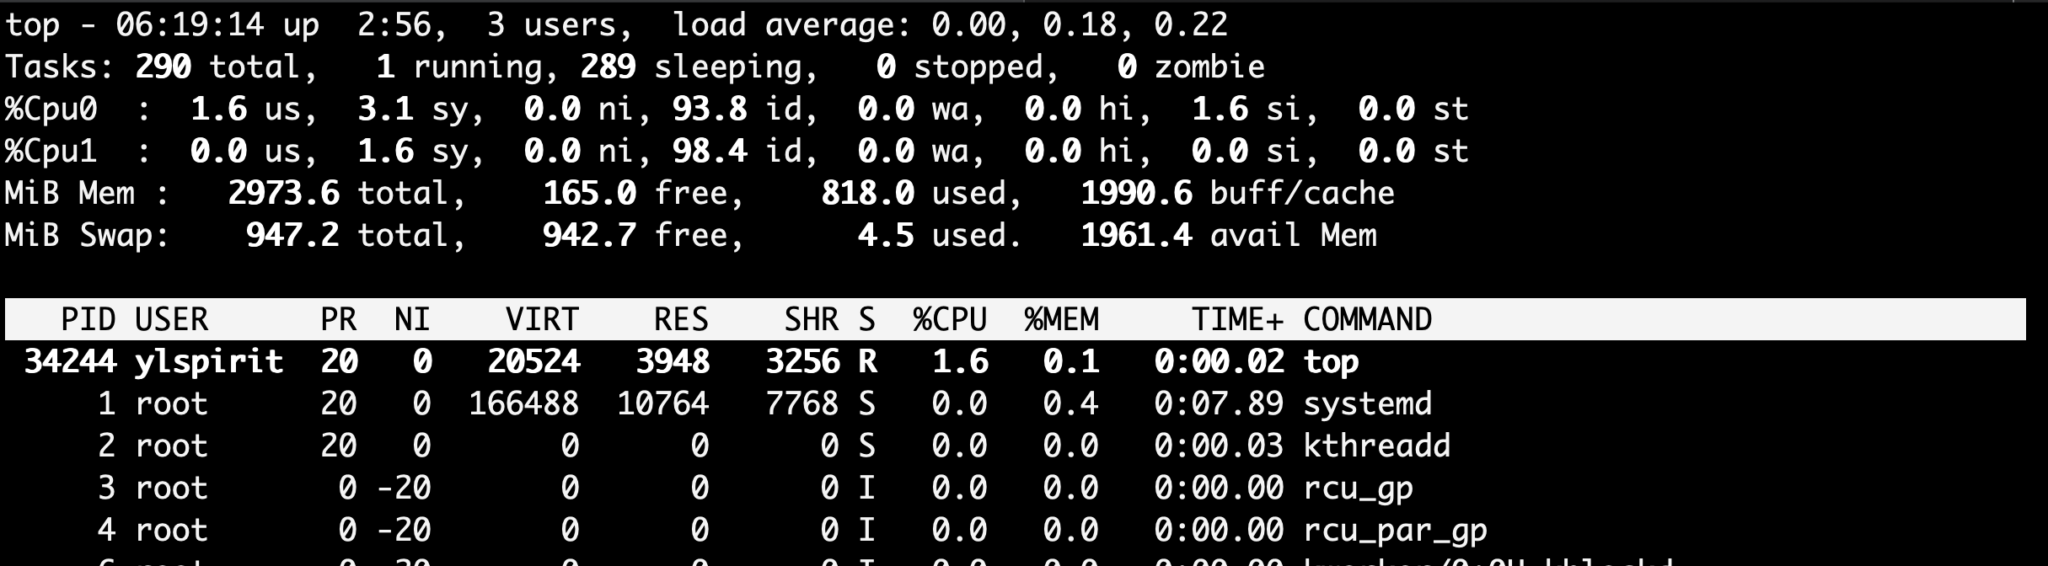 ATOP Linux. Top Linux. Ll Linux. Load average.